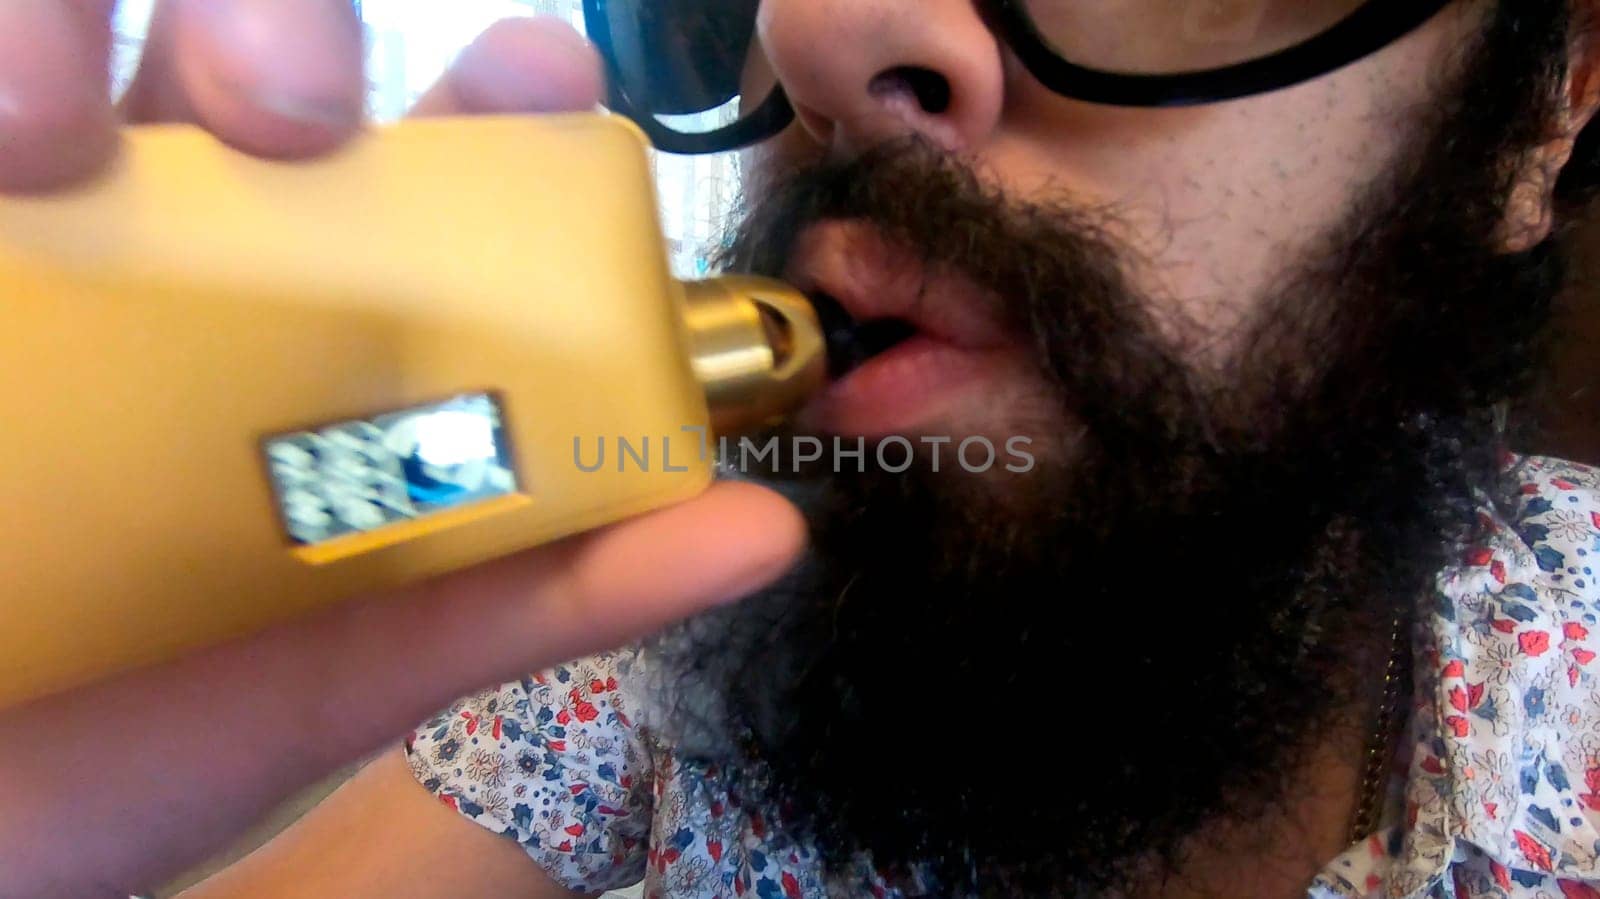 Close-up of a bearded man inhaling from a handheld vaping device